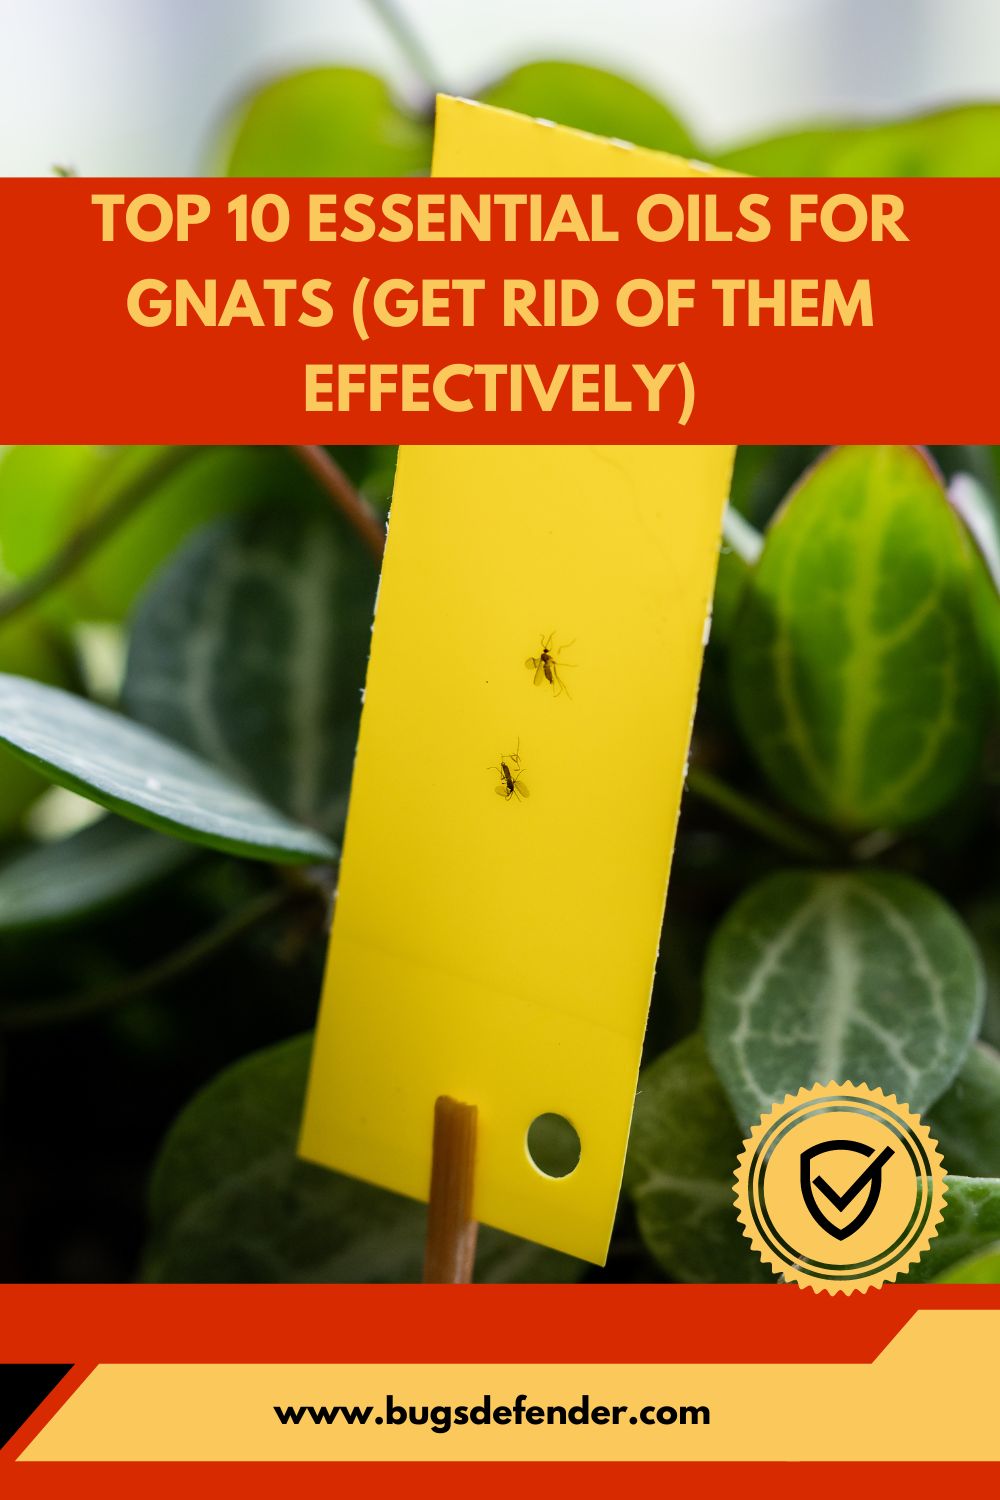 Top 10 Essential Oils For Gnats pin2